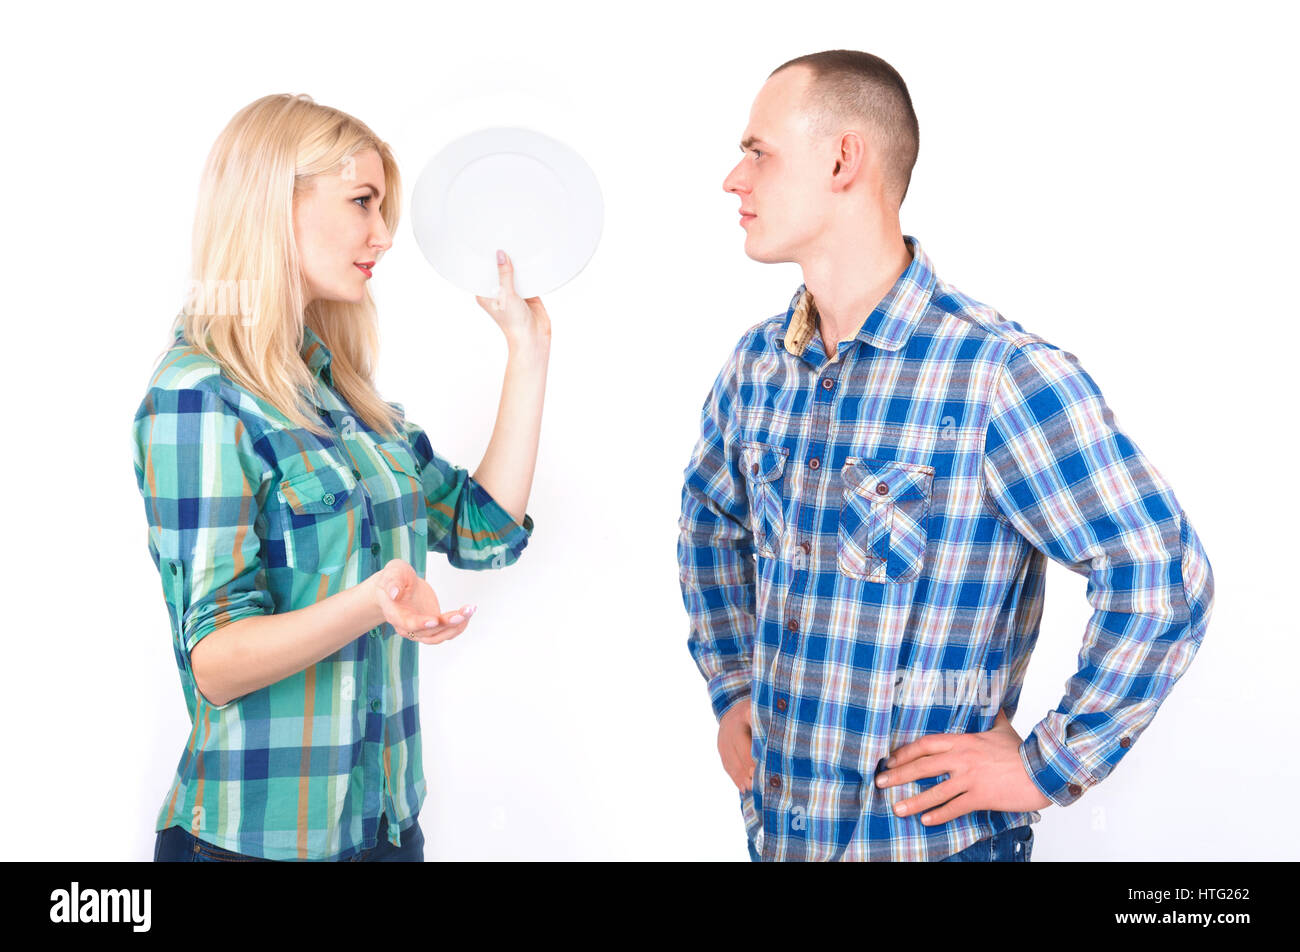 A man and a young woman with a plate in her hand quarrel in a studio on a white background. Stock Photo